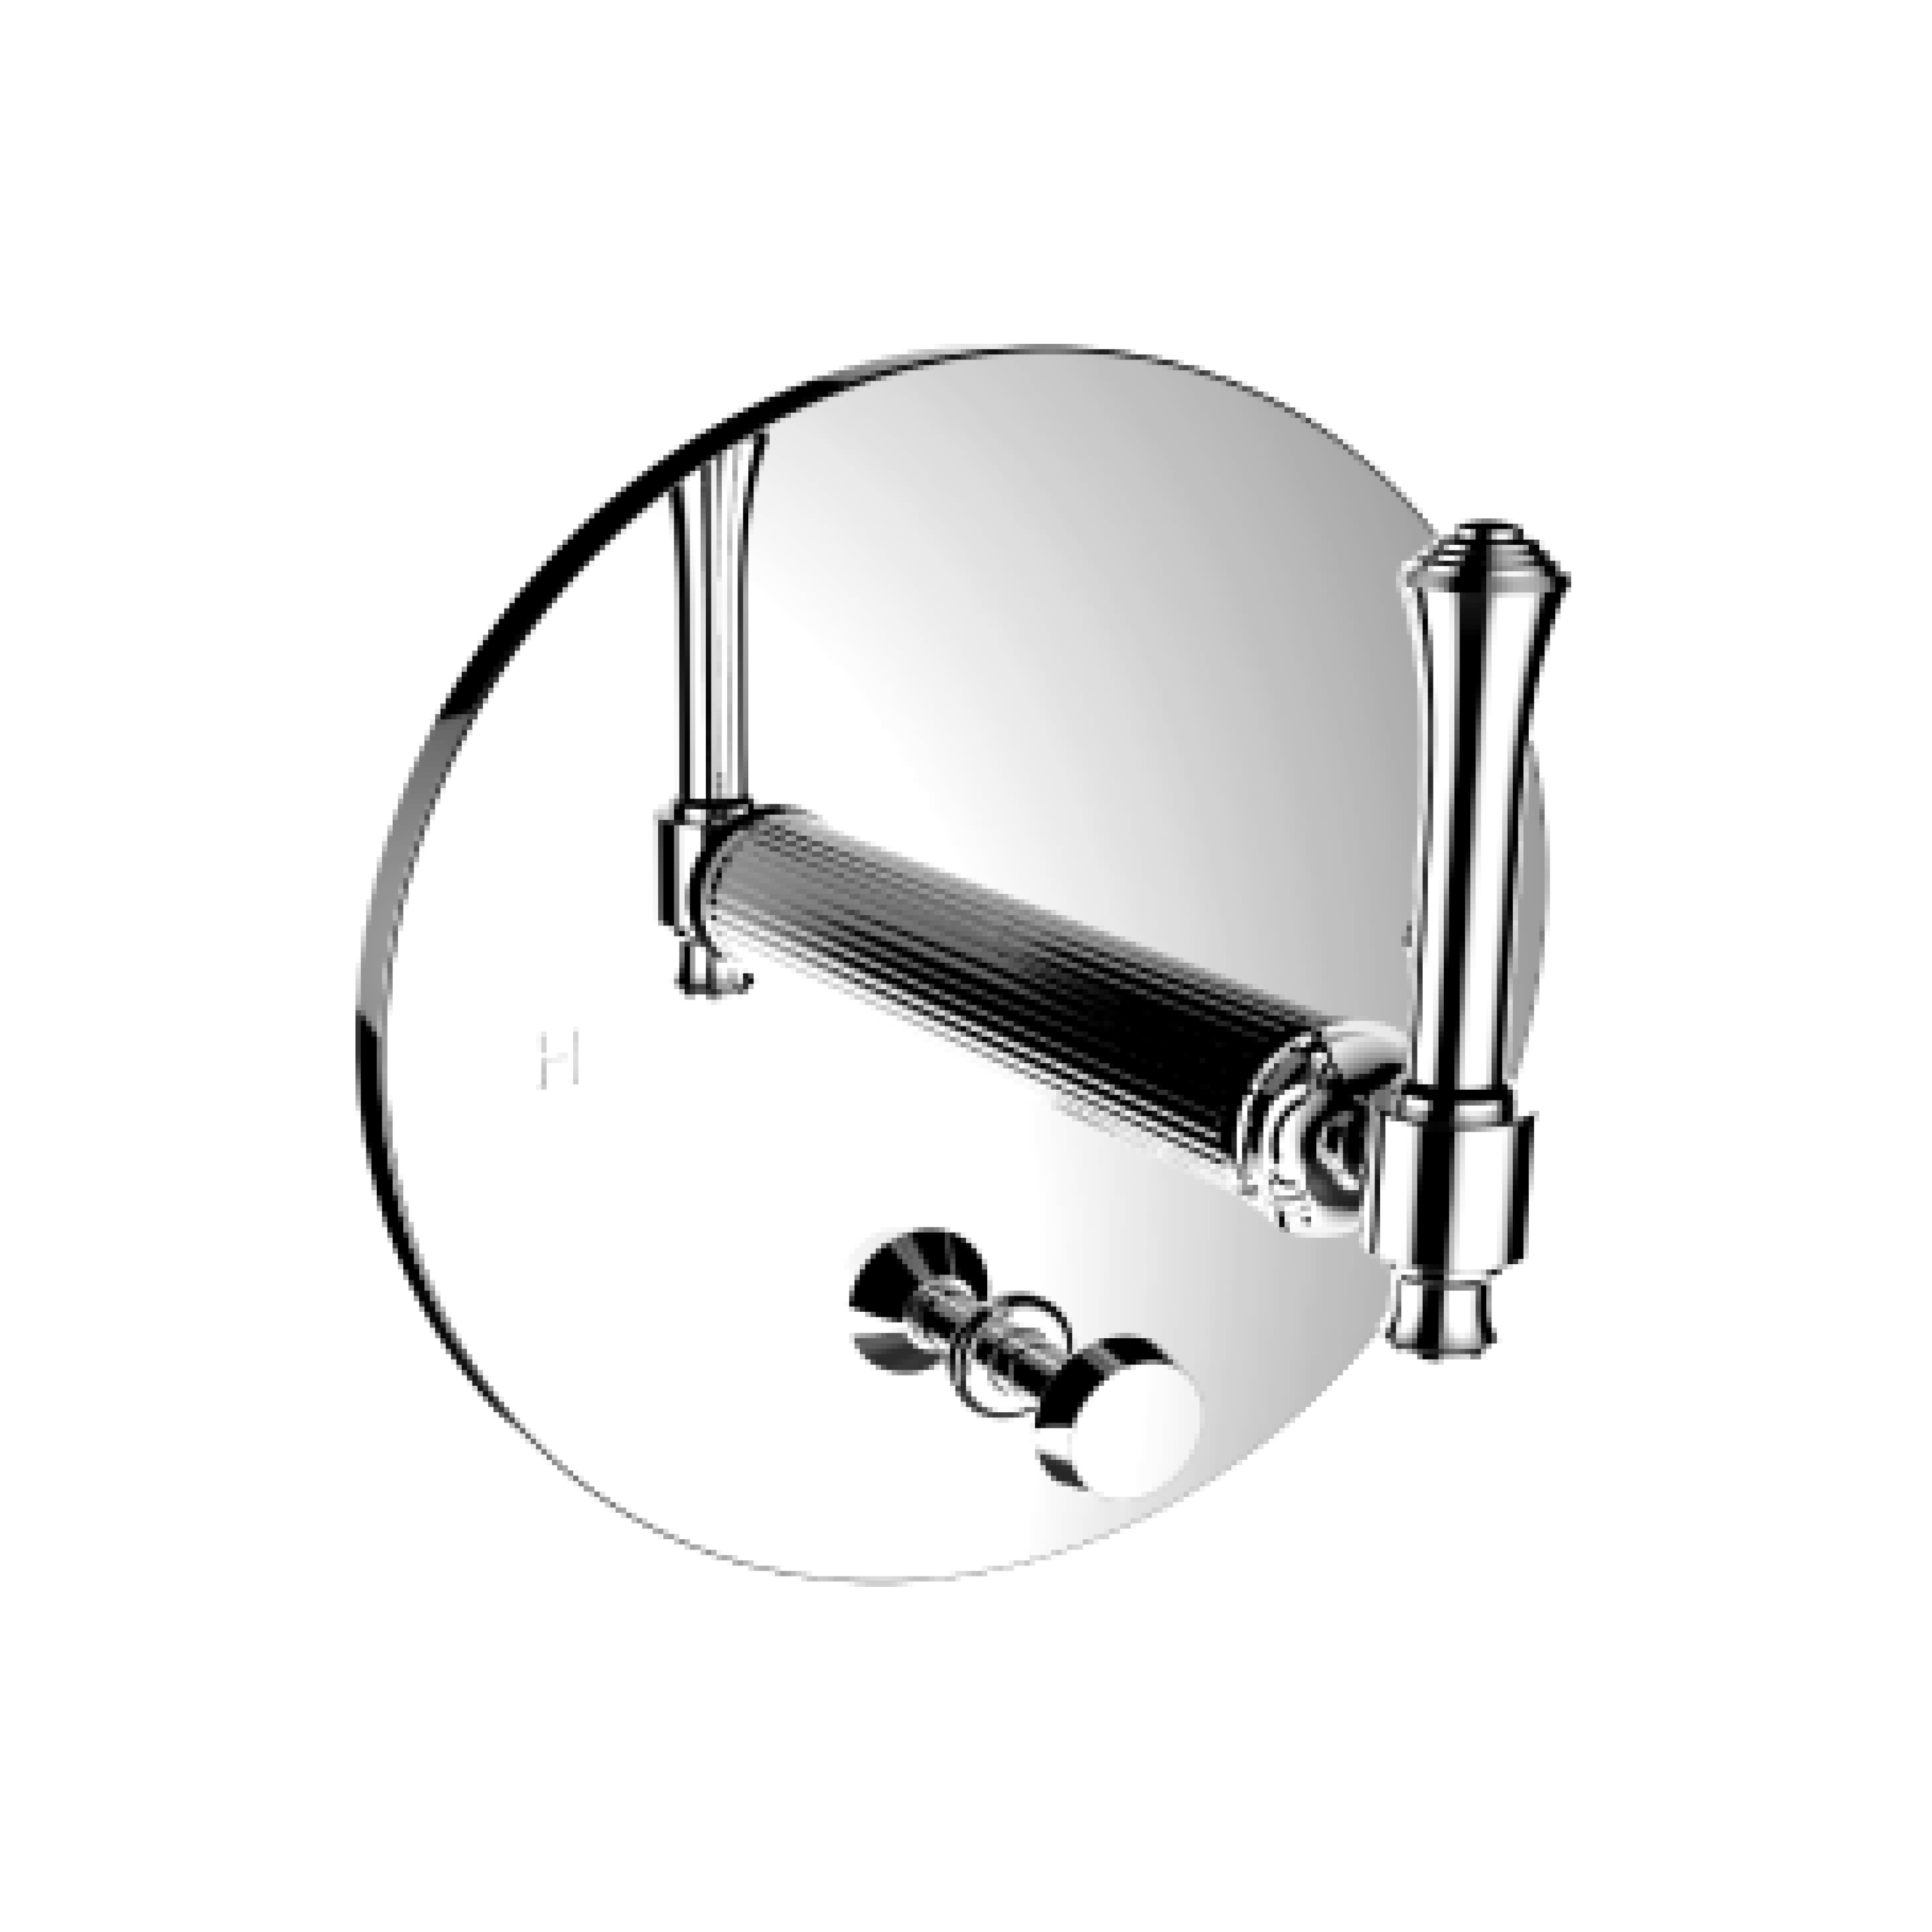 Santec 3435AT10-TM Athena II Pressure Balance Tub/Shower - Trim only with AT Handle - Polished Chrome